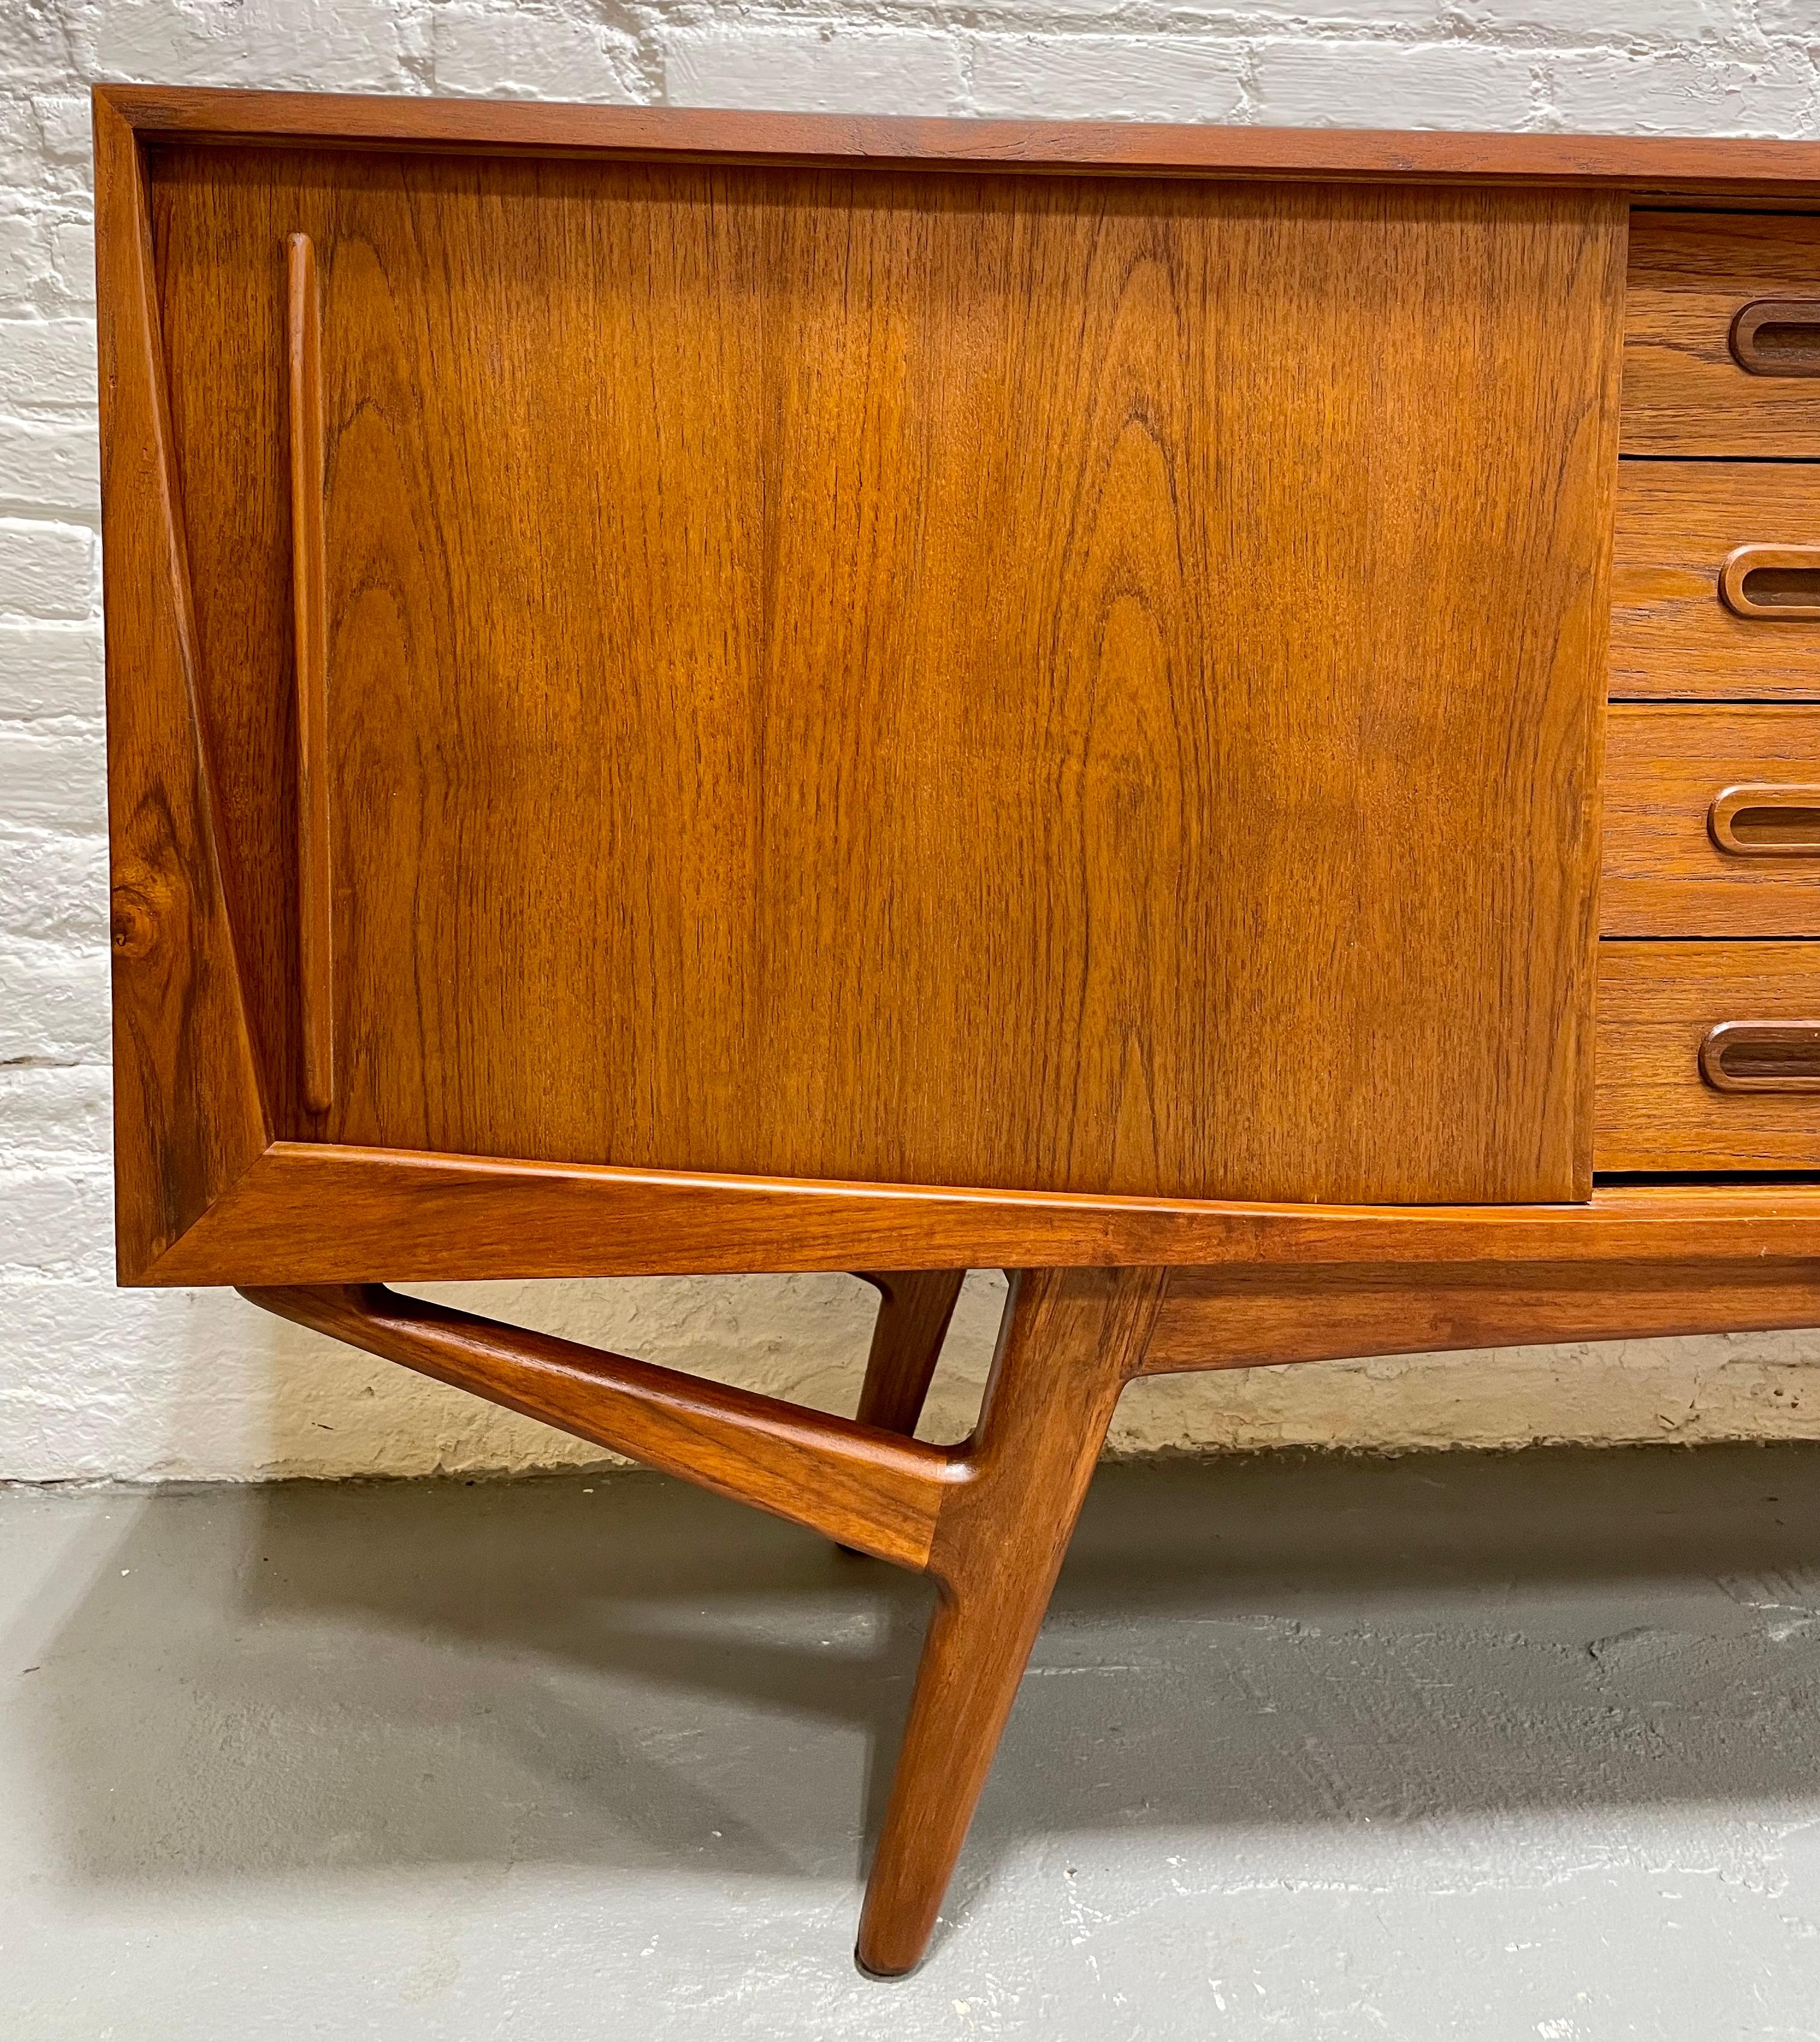 Contemporary Handmade Mid-Century Modern styled Teak Credenza / Sideboard For Sale